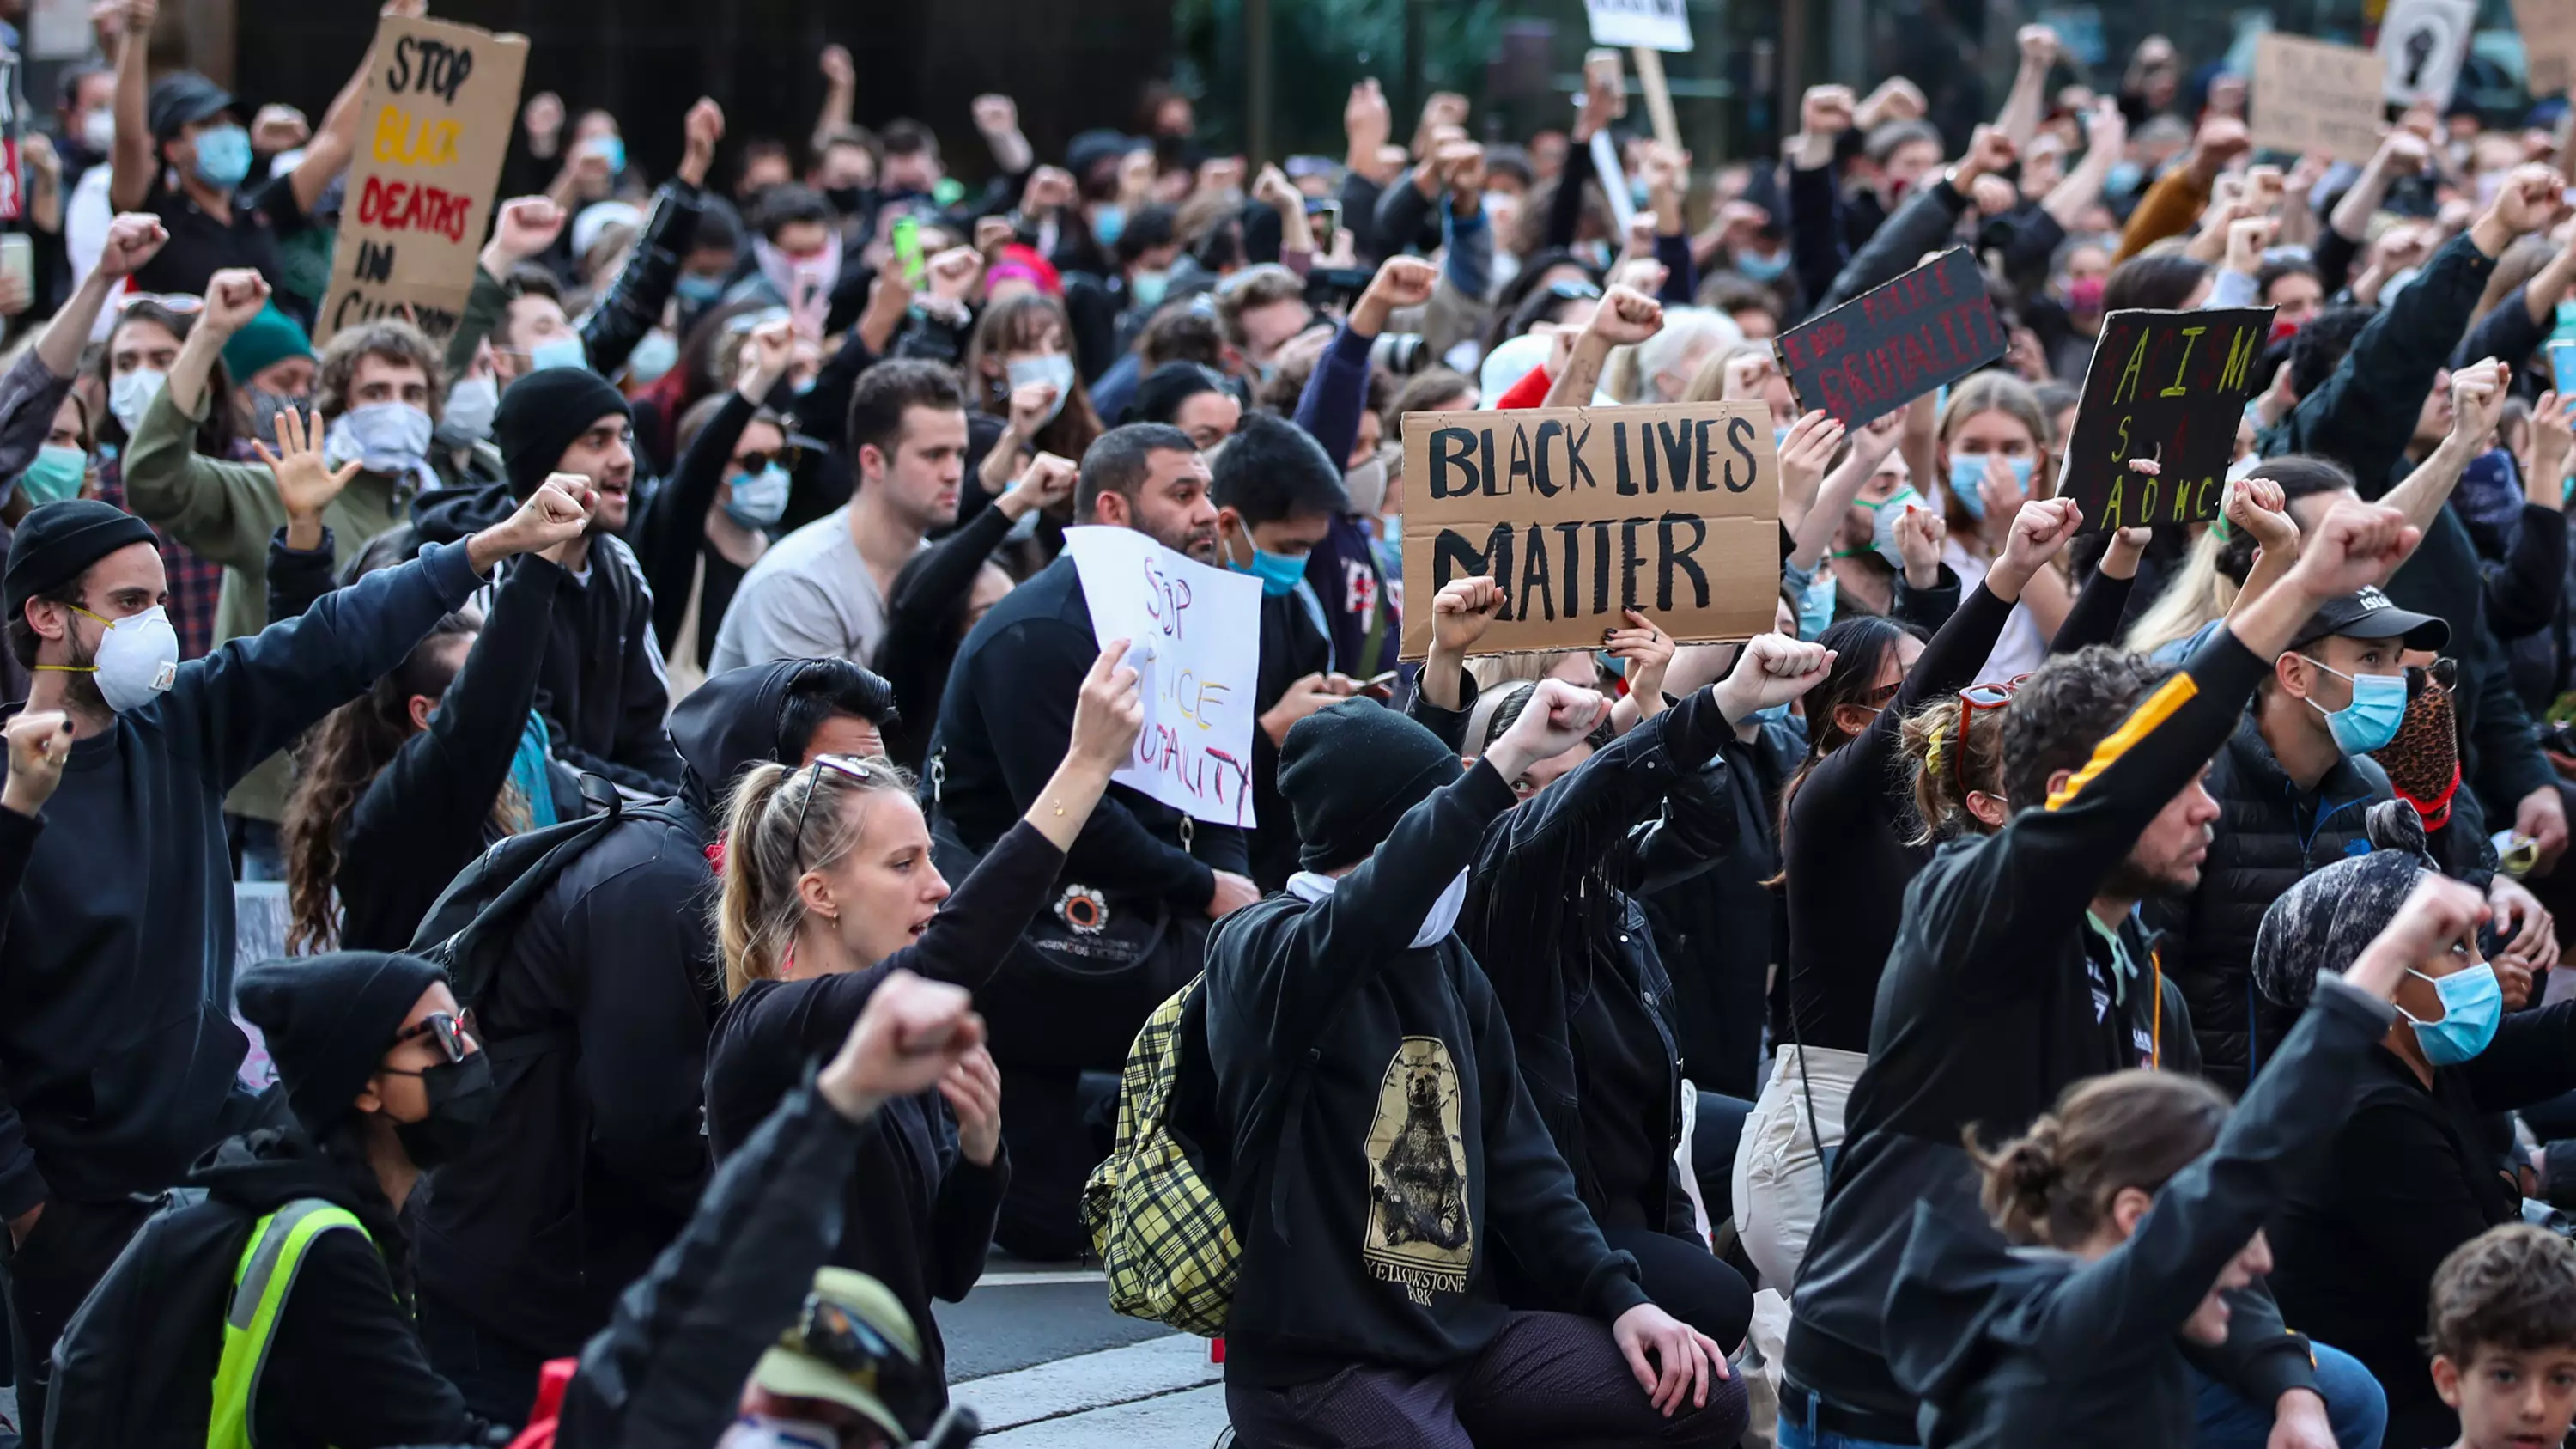 People Who Attended Black Lives Matter Protests In Australia Urged To Self-Isolate